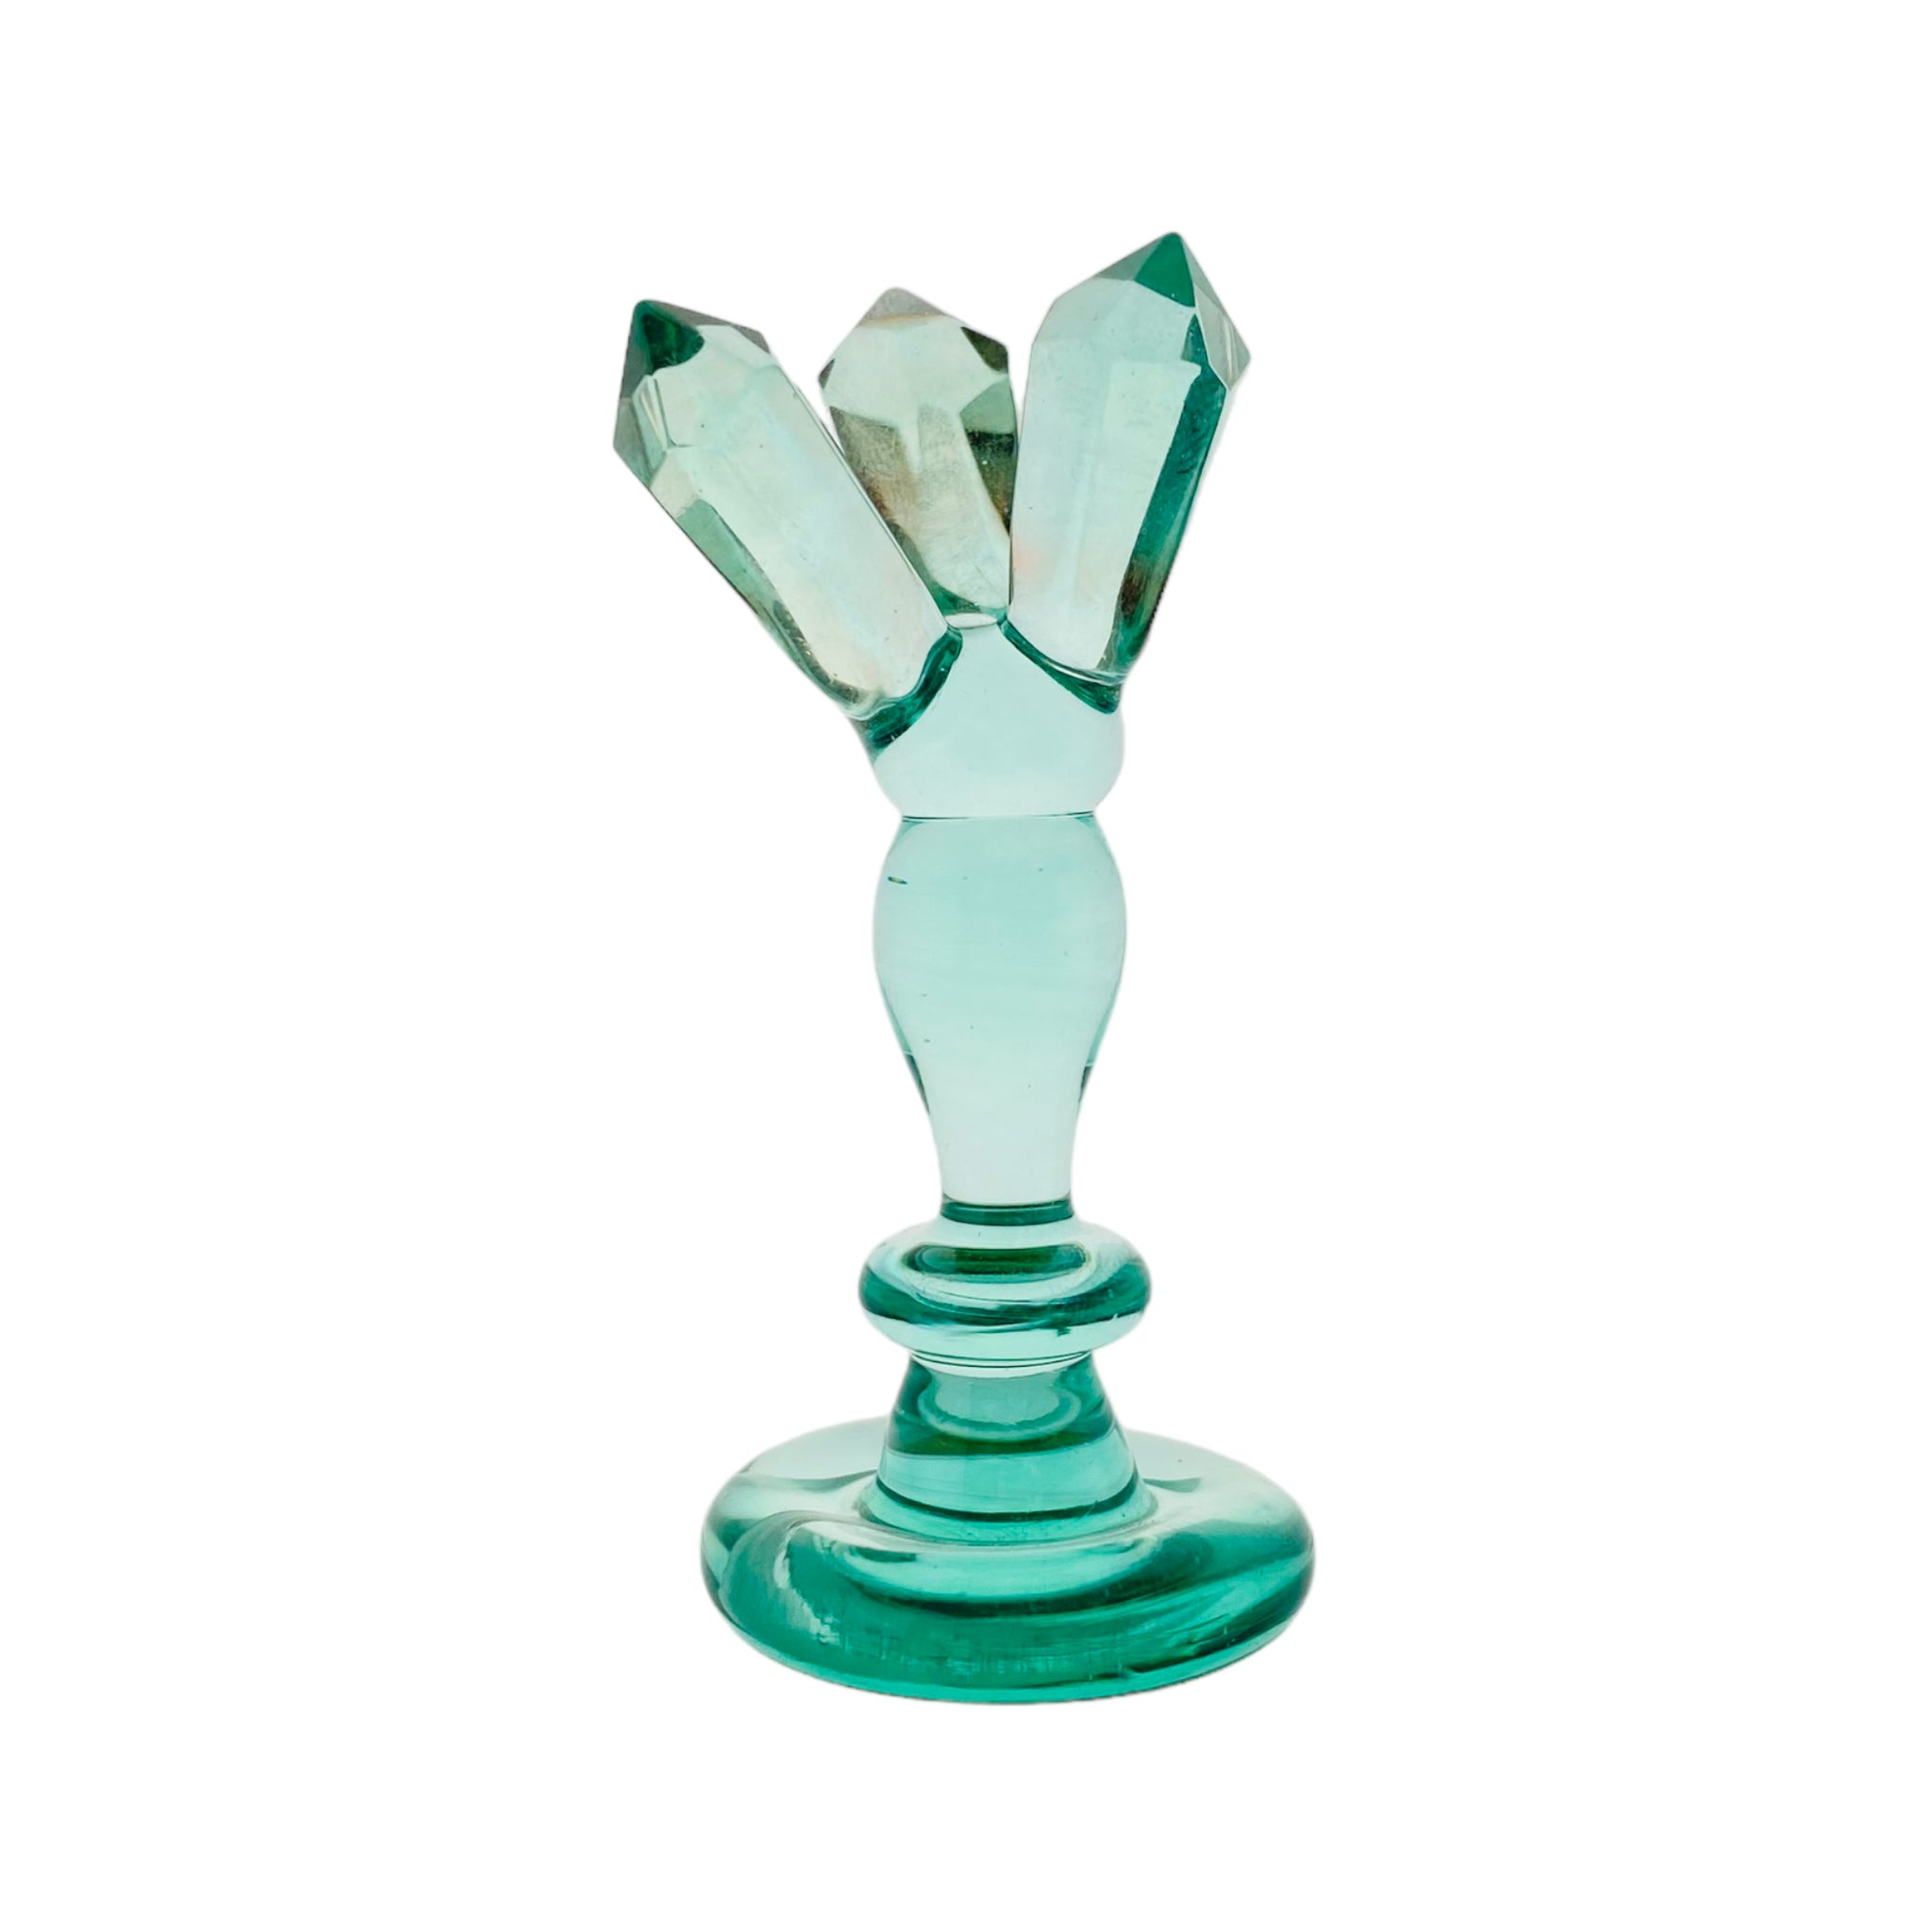 Aqua Teal Crystal Carb Cap with decorative hand faceted crystals 